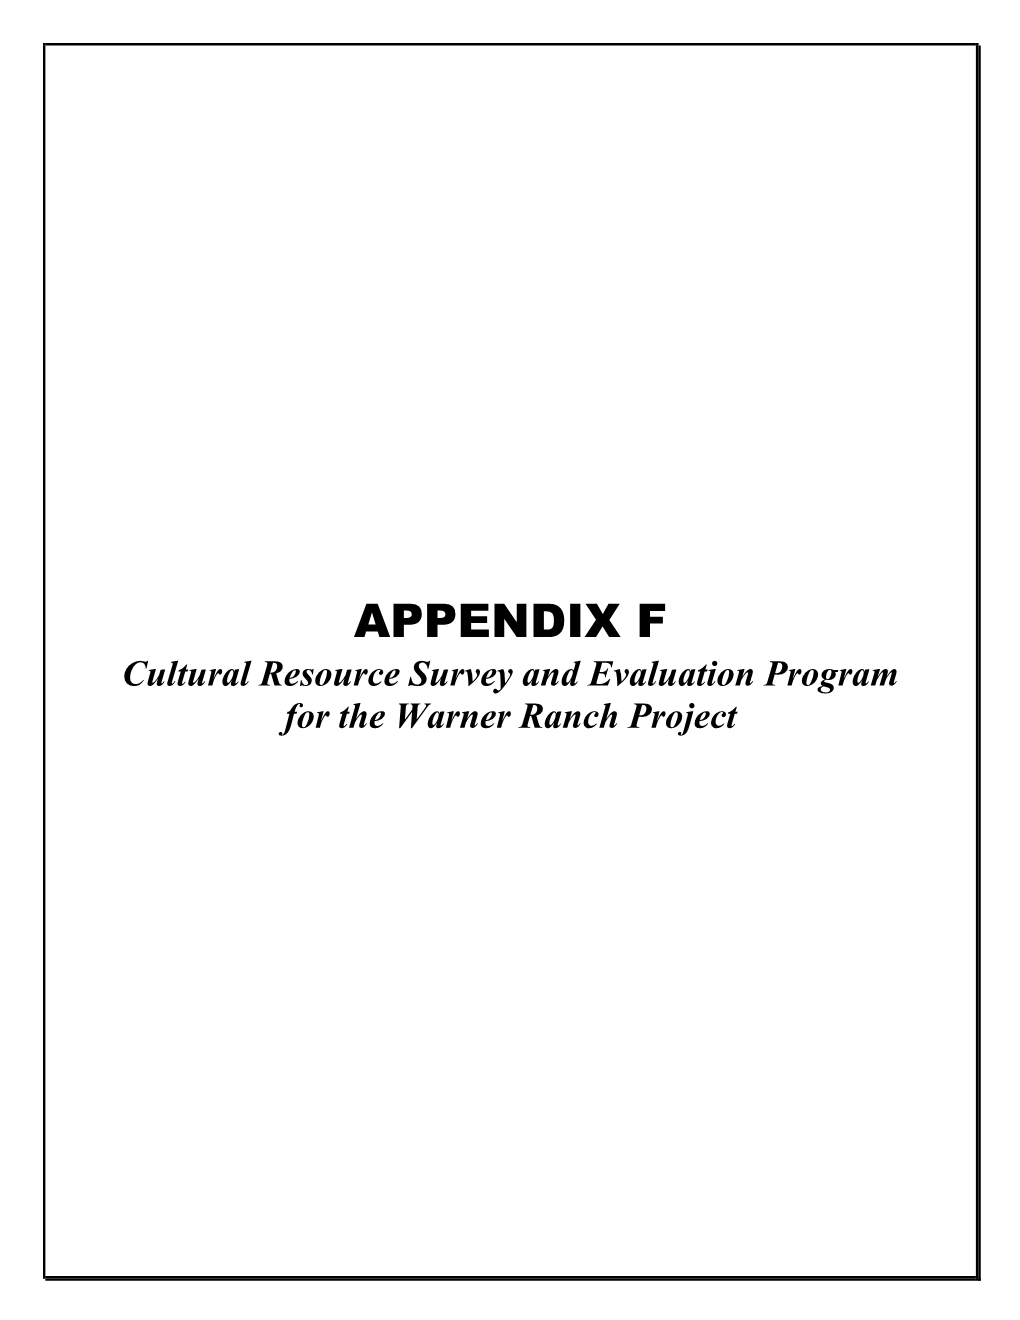 APPENDIX F Cultural Resource Survey and Evaluation Program for the Warner Ranch Project